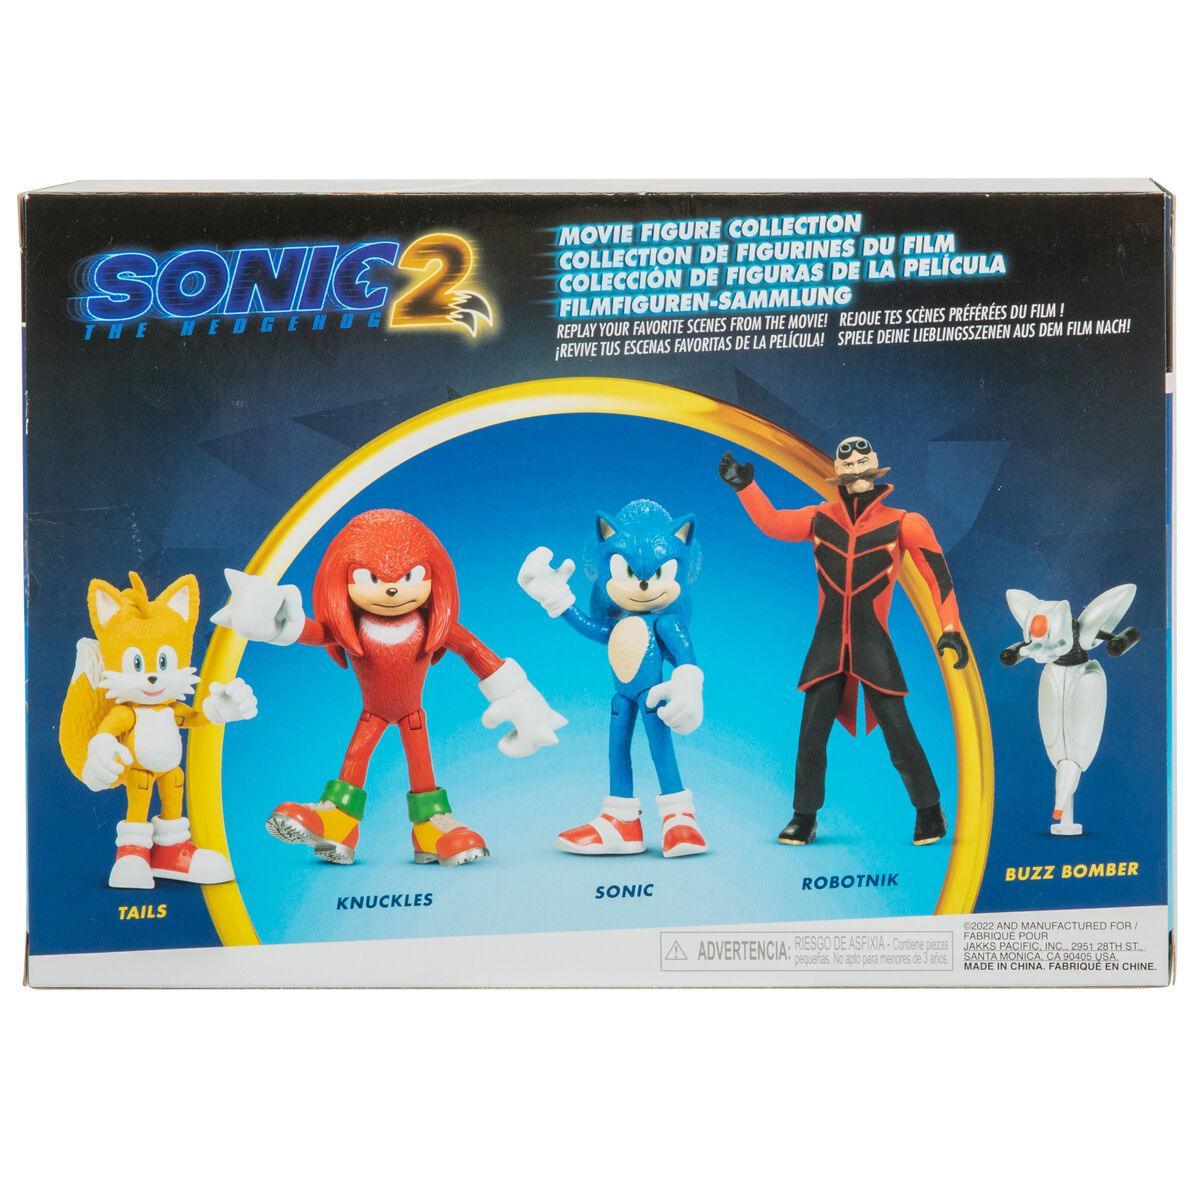 Classic Sonic The Hedgehog Collection 5 pack by Jakks Pacific 